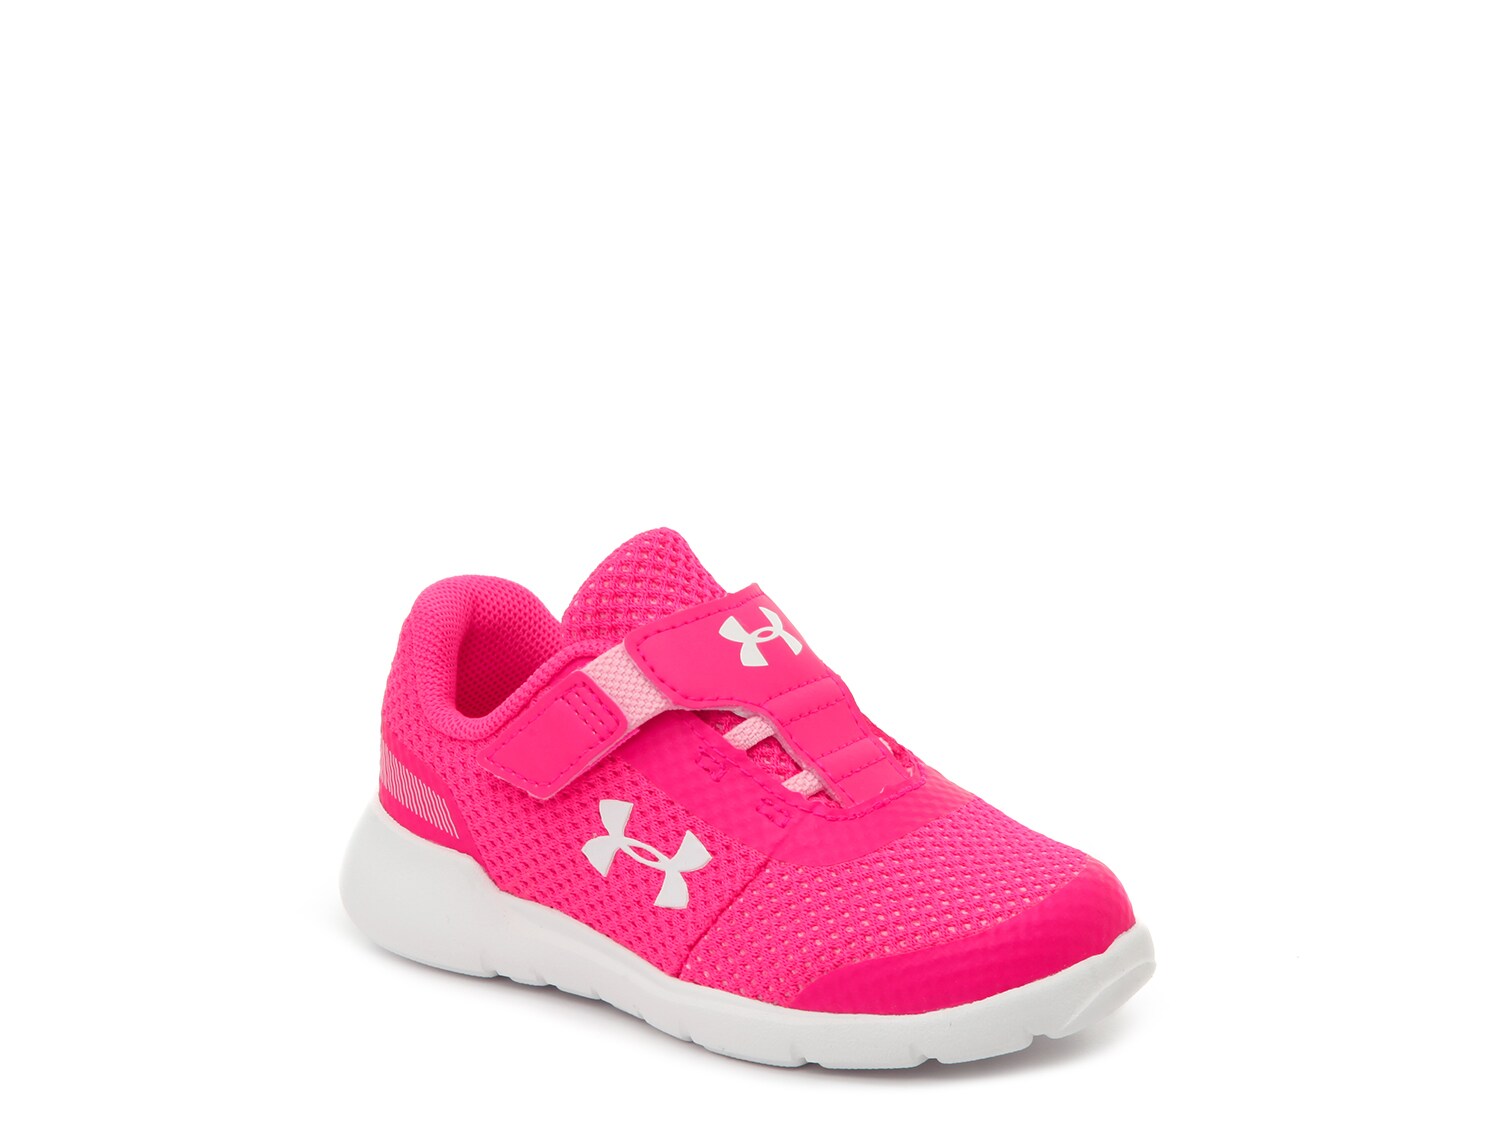 under armour toddler surge shoes